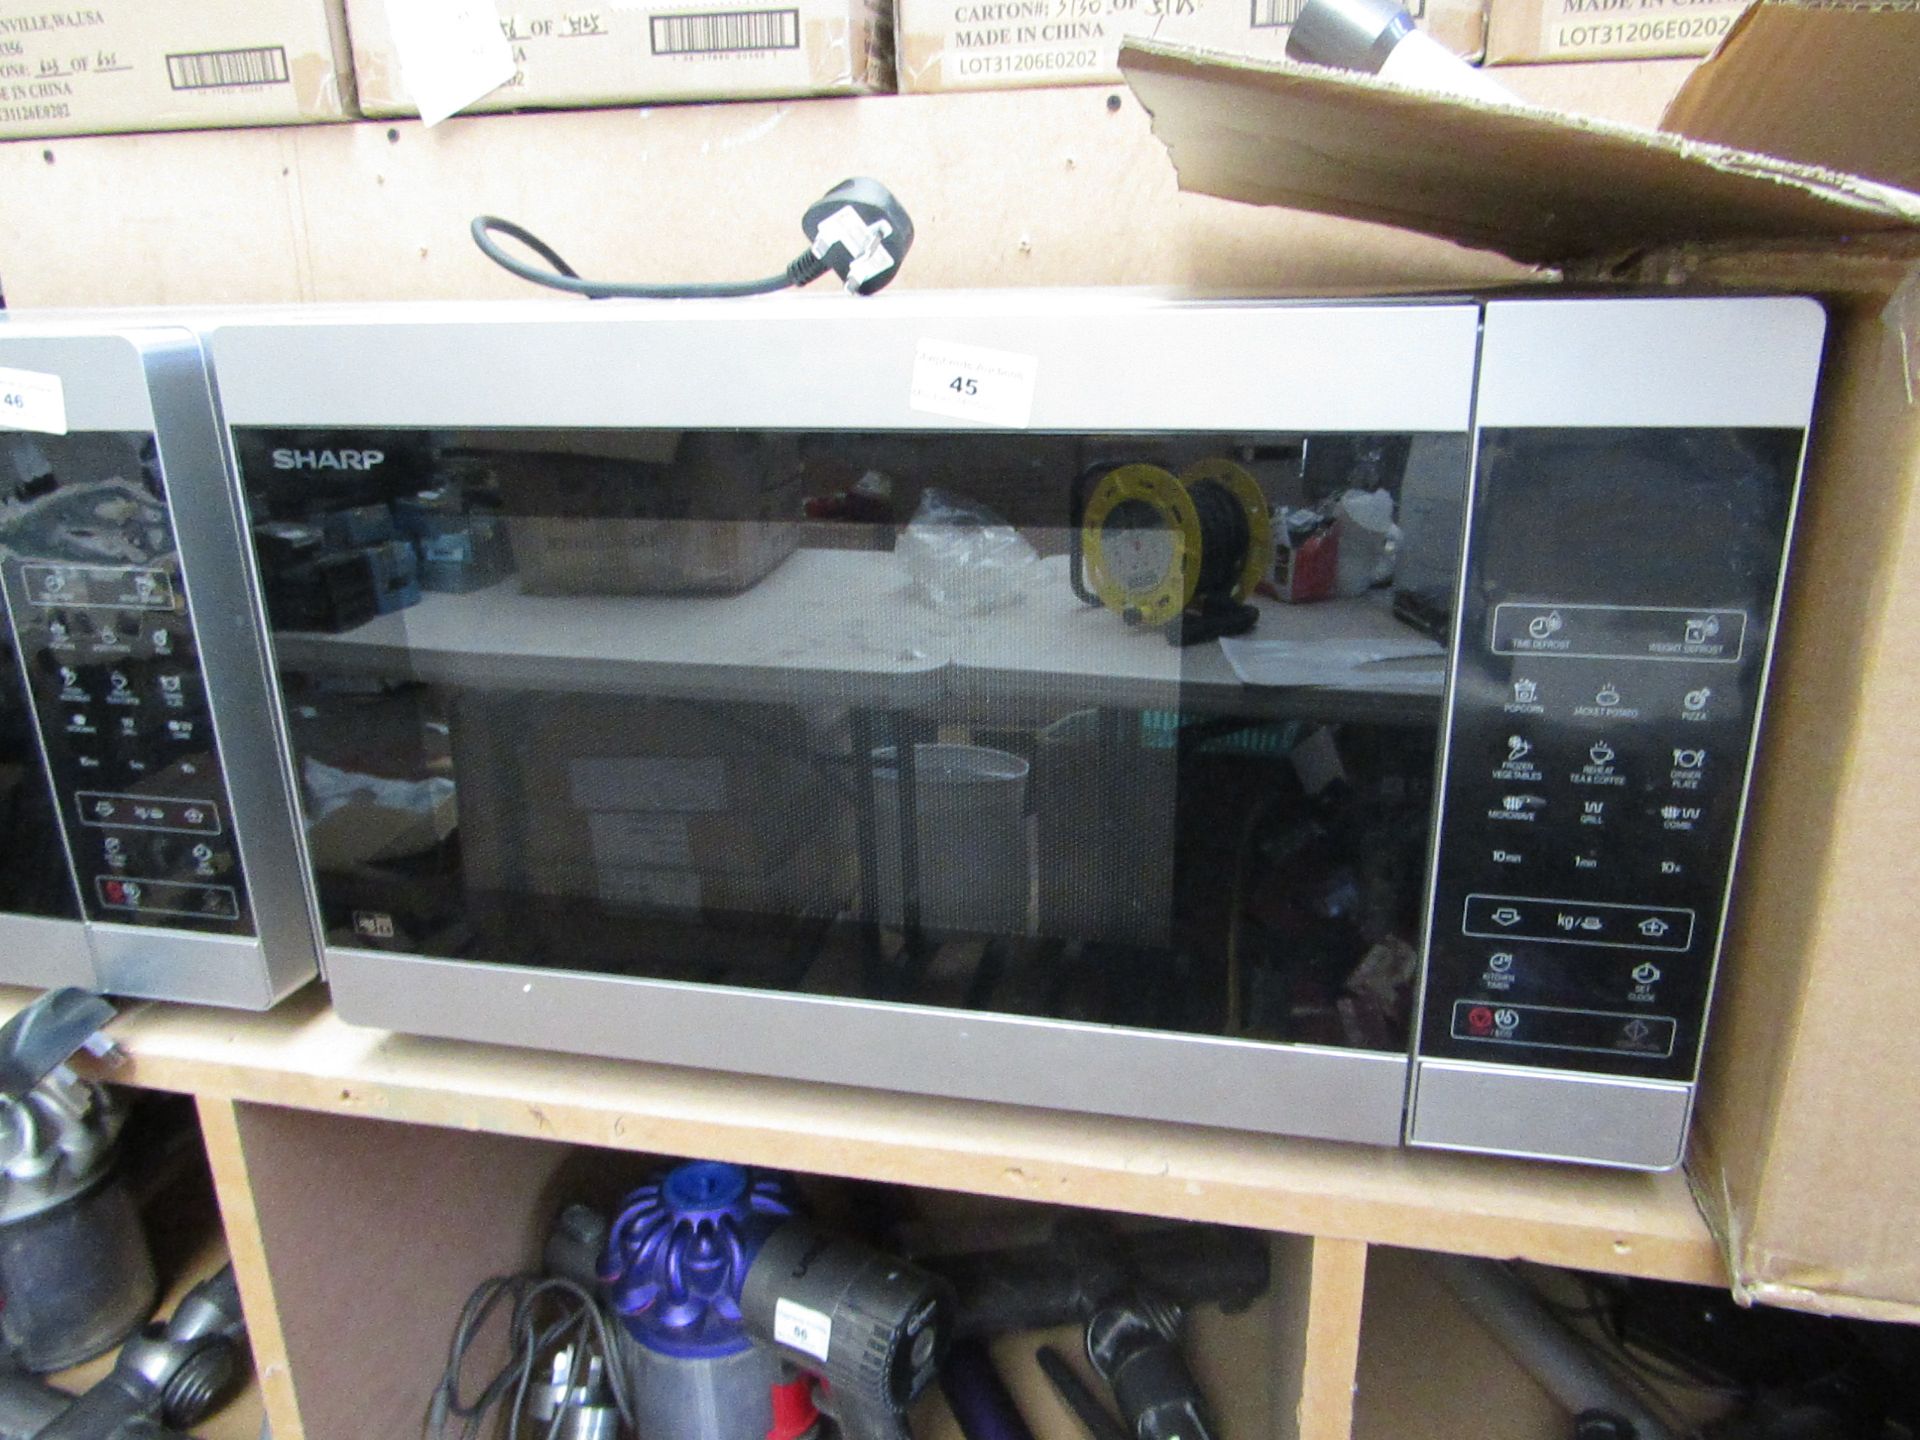 Sharp YC-MG81U-S Microwave and grill, tested working on the microwave function as in we heated a